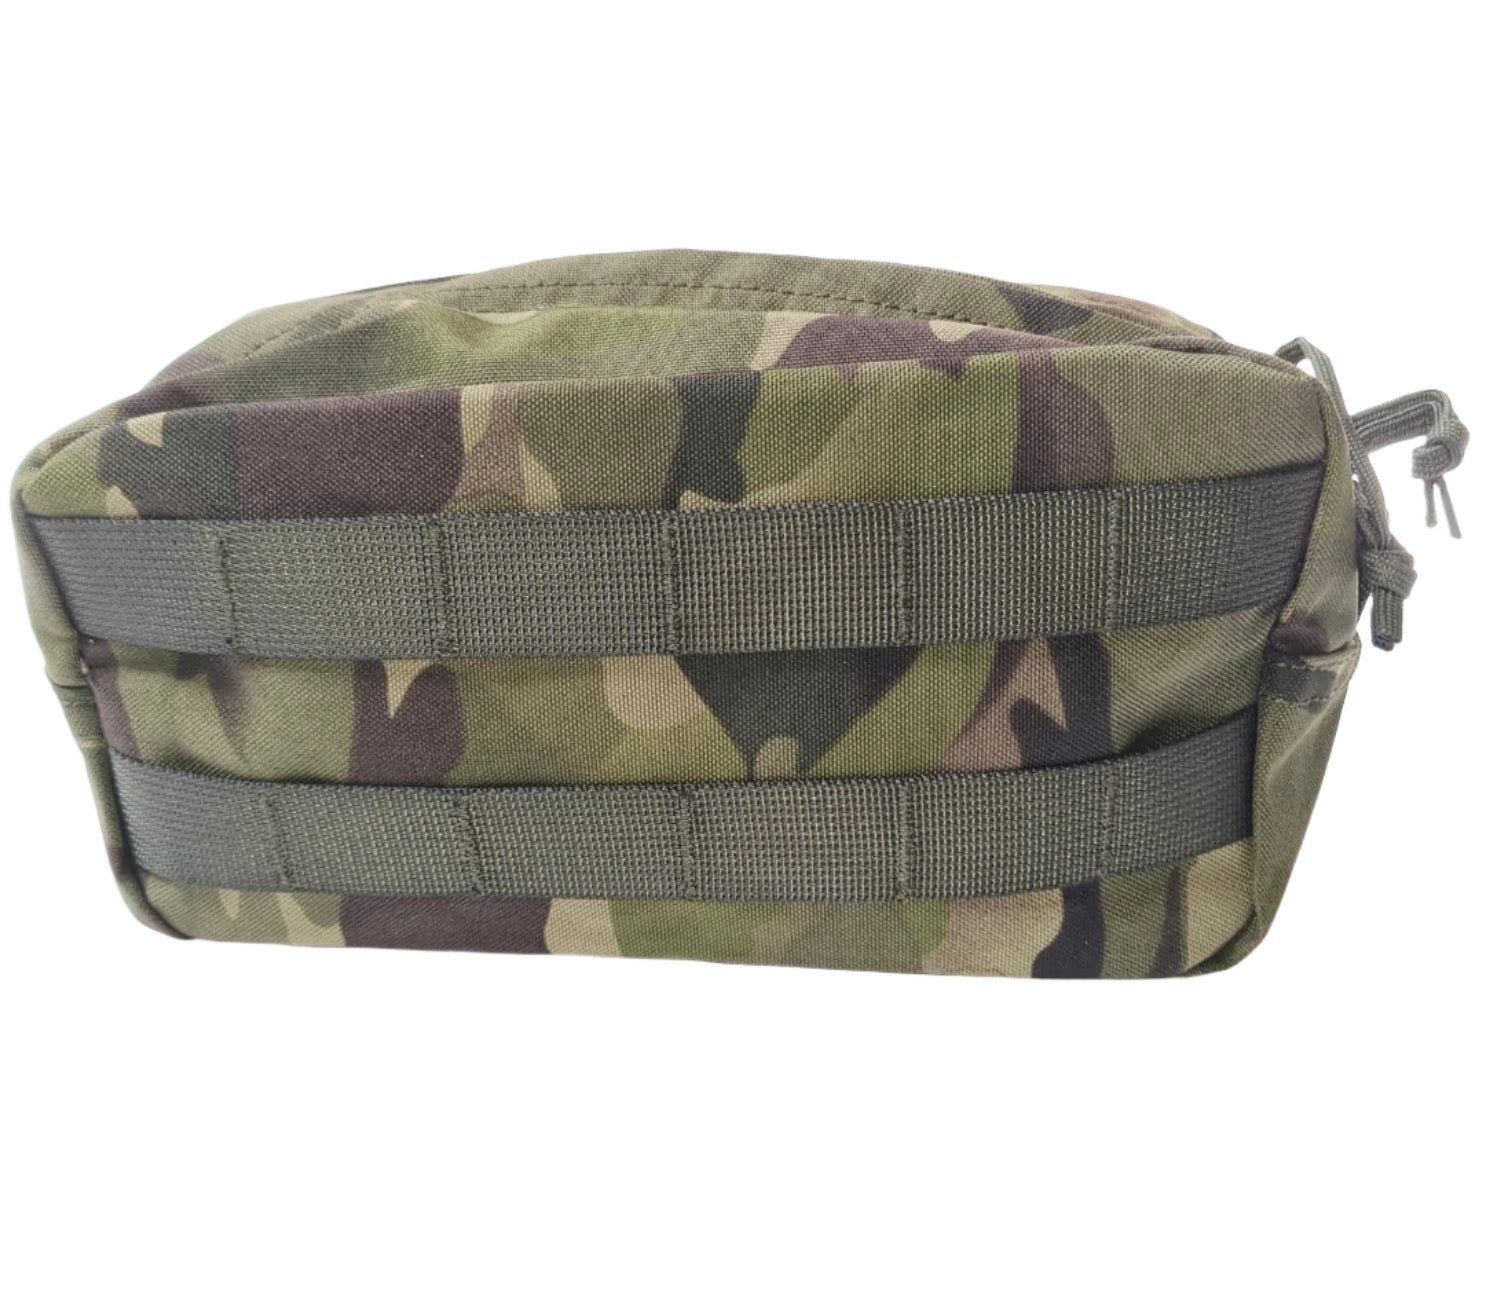 SHE-1421 HORIZONTAL UTILITY POUCH - UTP TEMPERATE